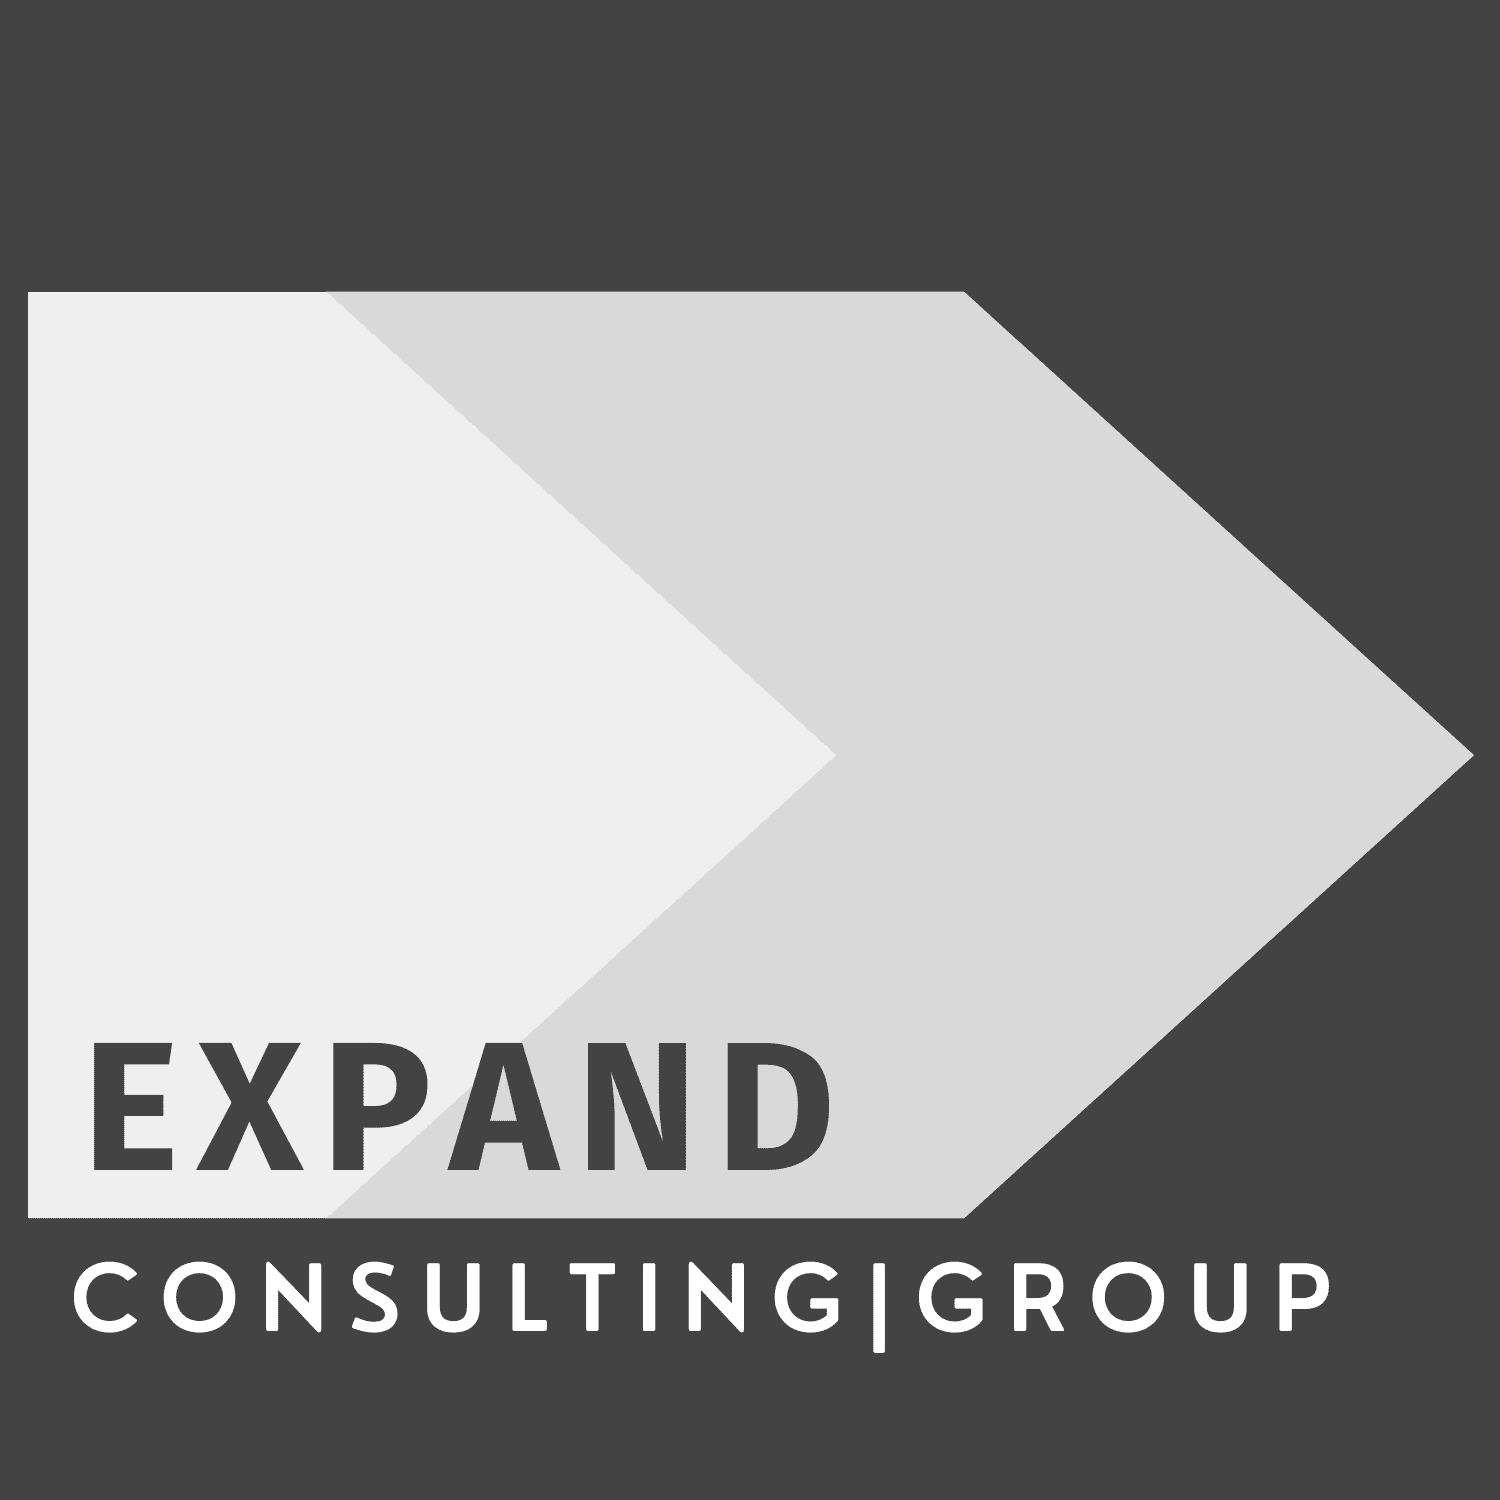 Expand Consulting Group